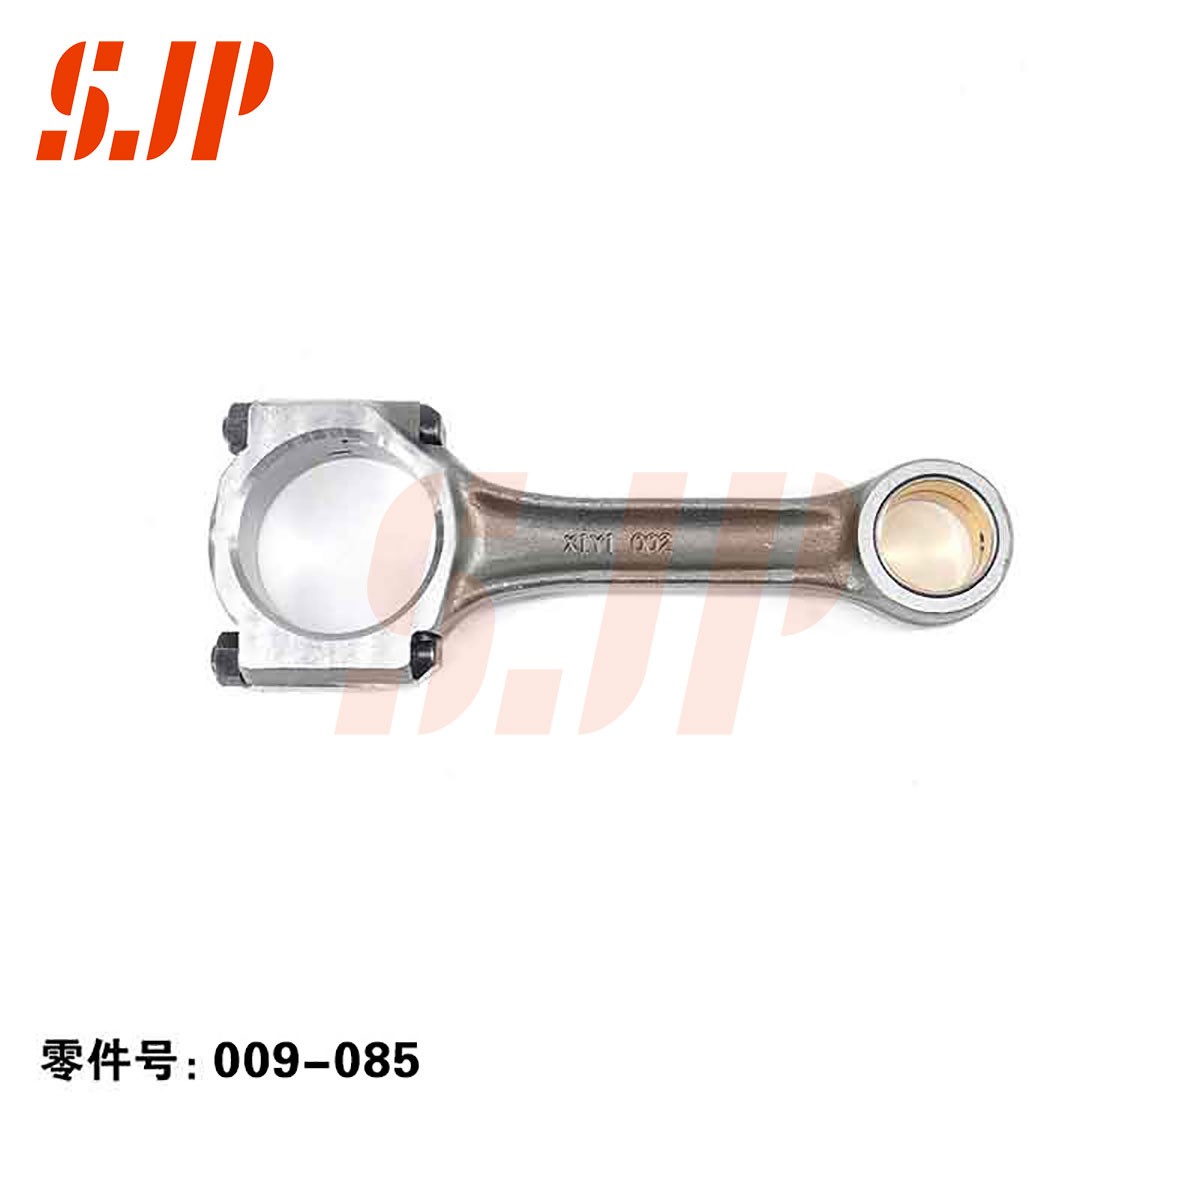 SJ-009-085 Connecting Rod For 4JB1 31 Pin